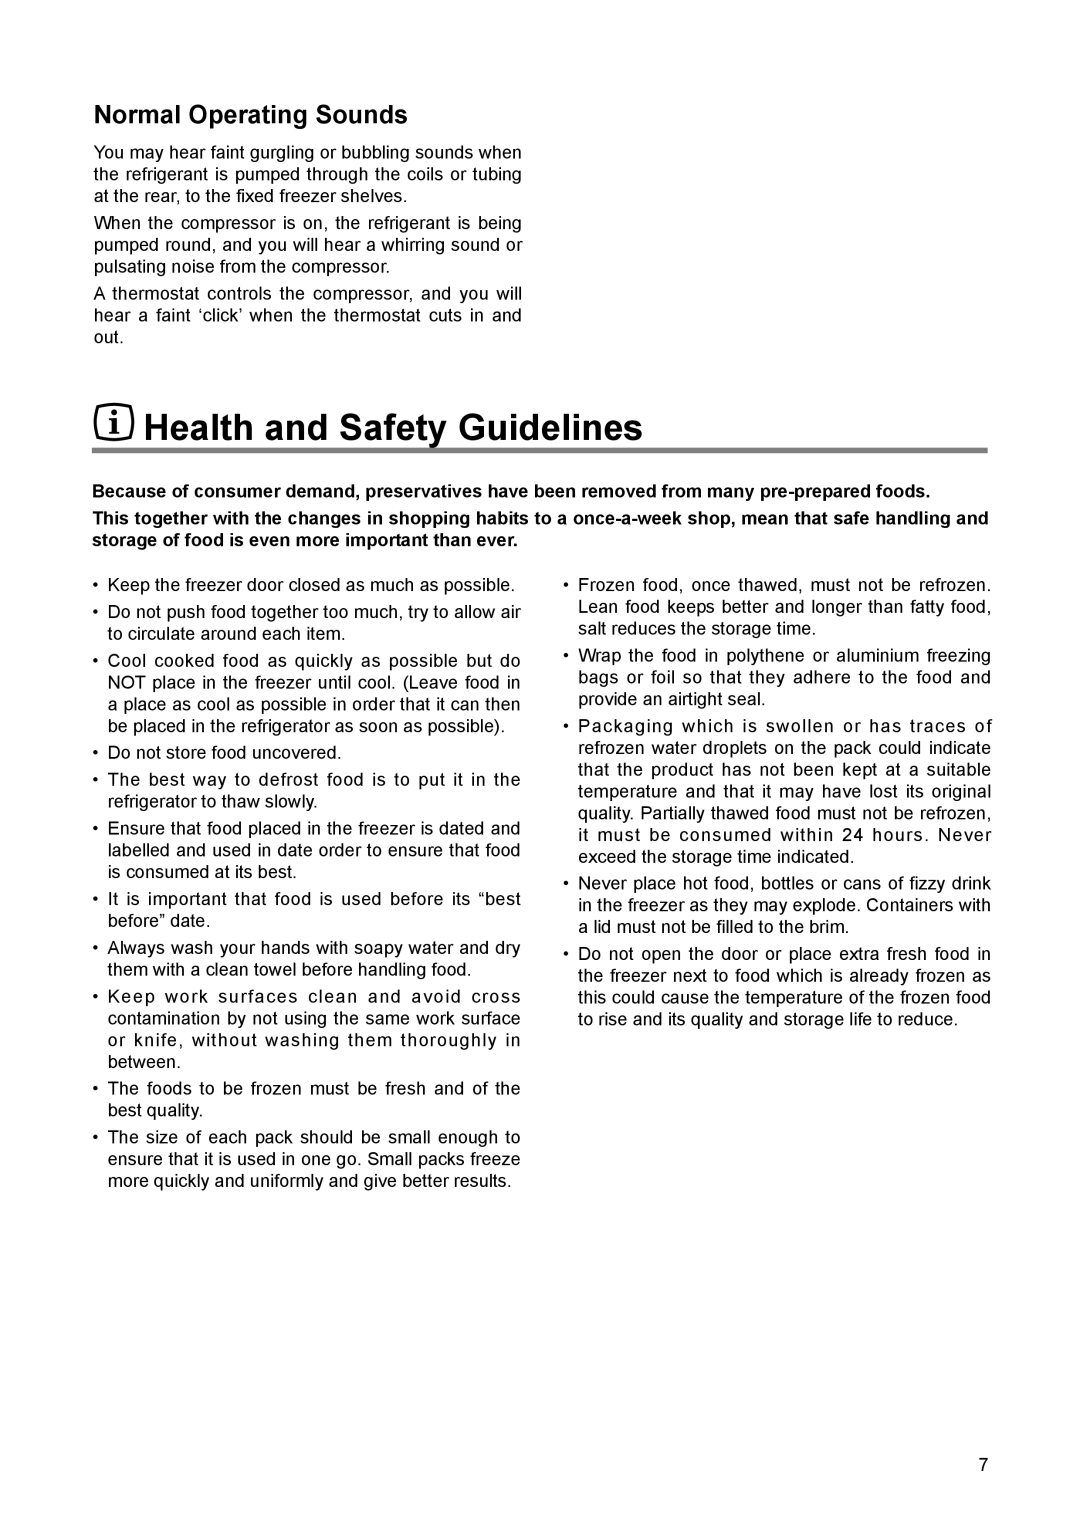 Electrolux EUN 12300 manual Health and Safety Guidelines, Normal Operating Sounds 